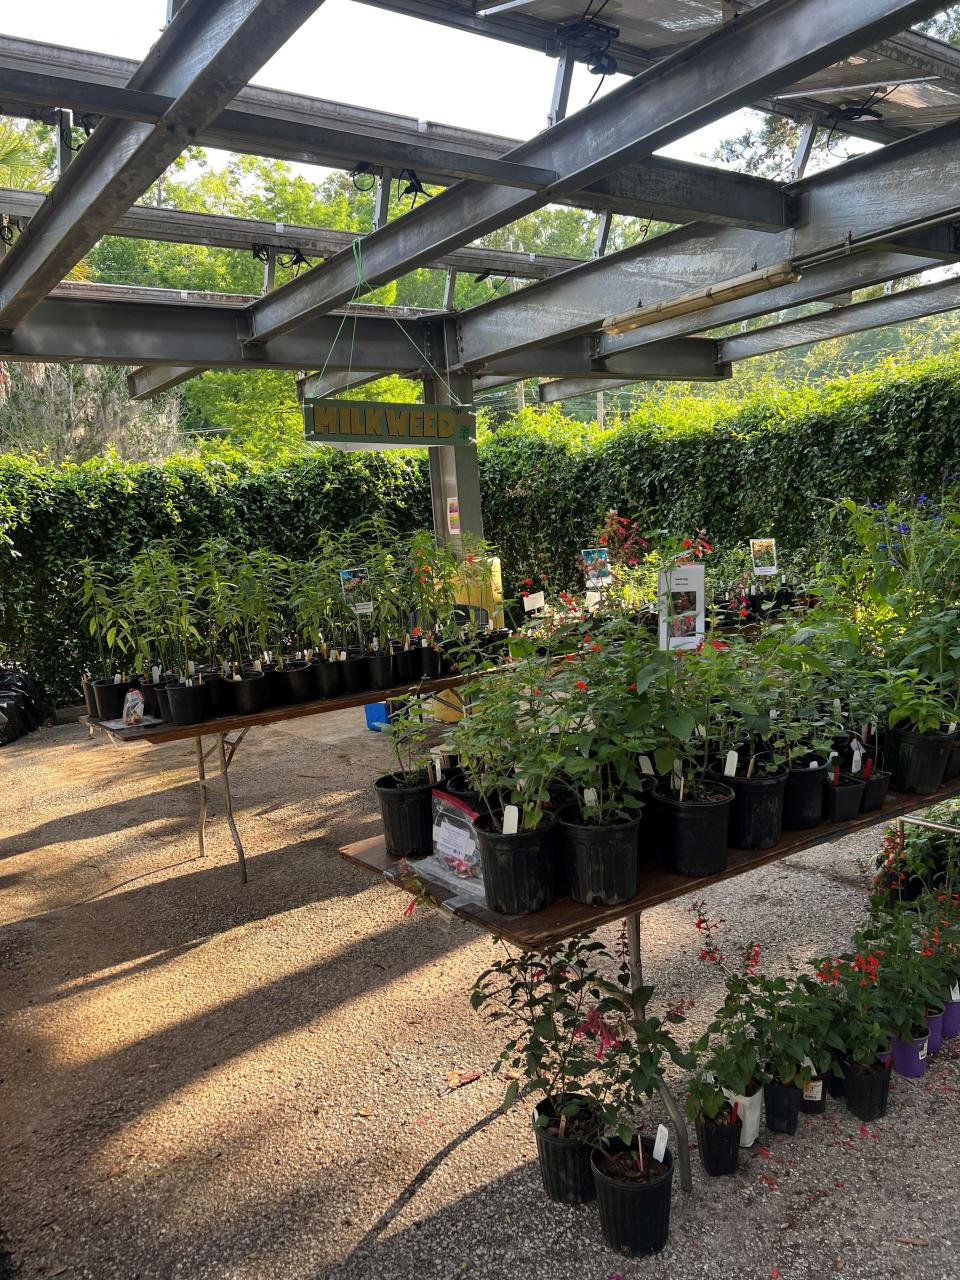 The plant sale at the UF/IFAS Leon County Extension Open House offers a diverse selection of meticulously propagated plants, including hundreds of milkweed ready to be homed.